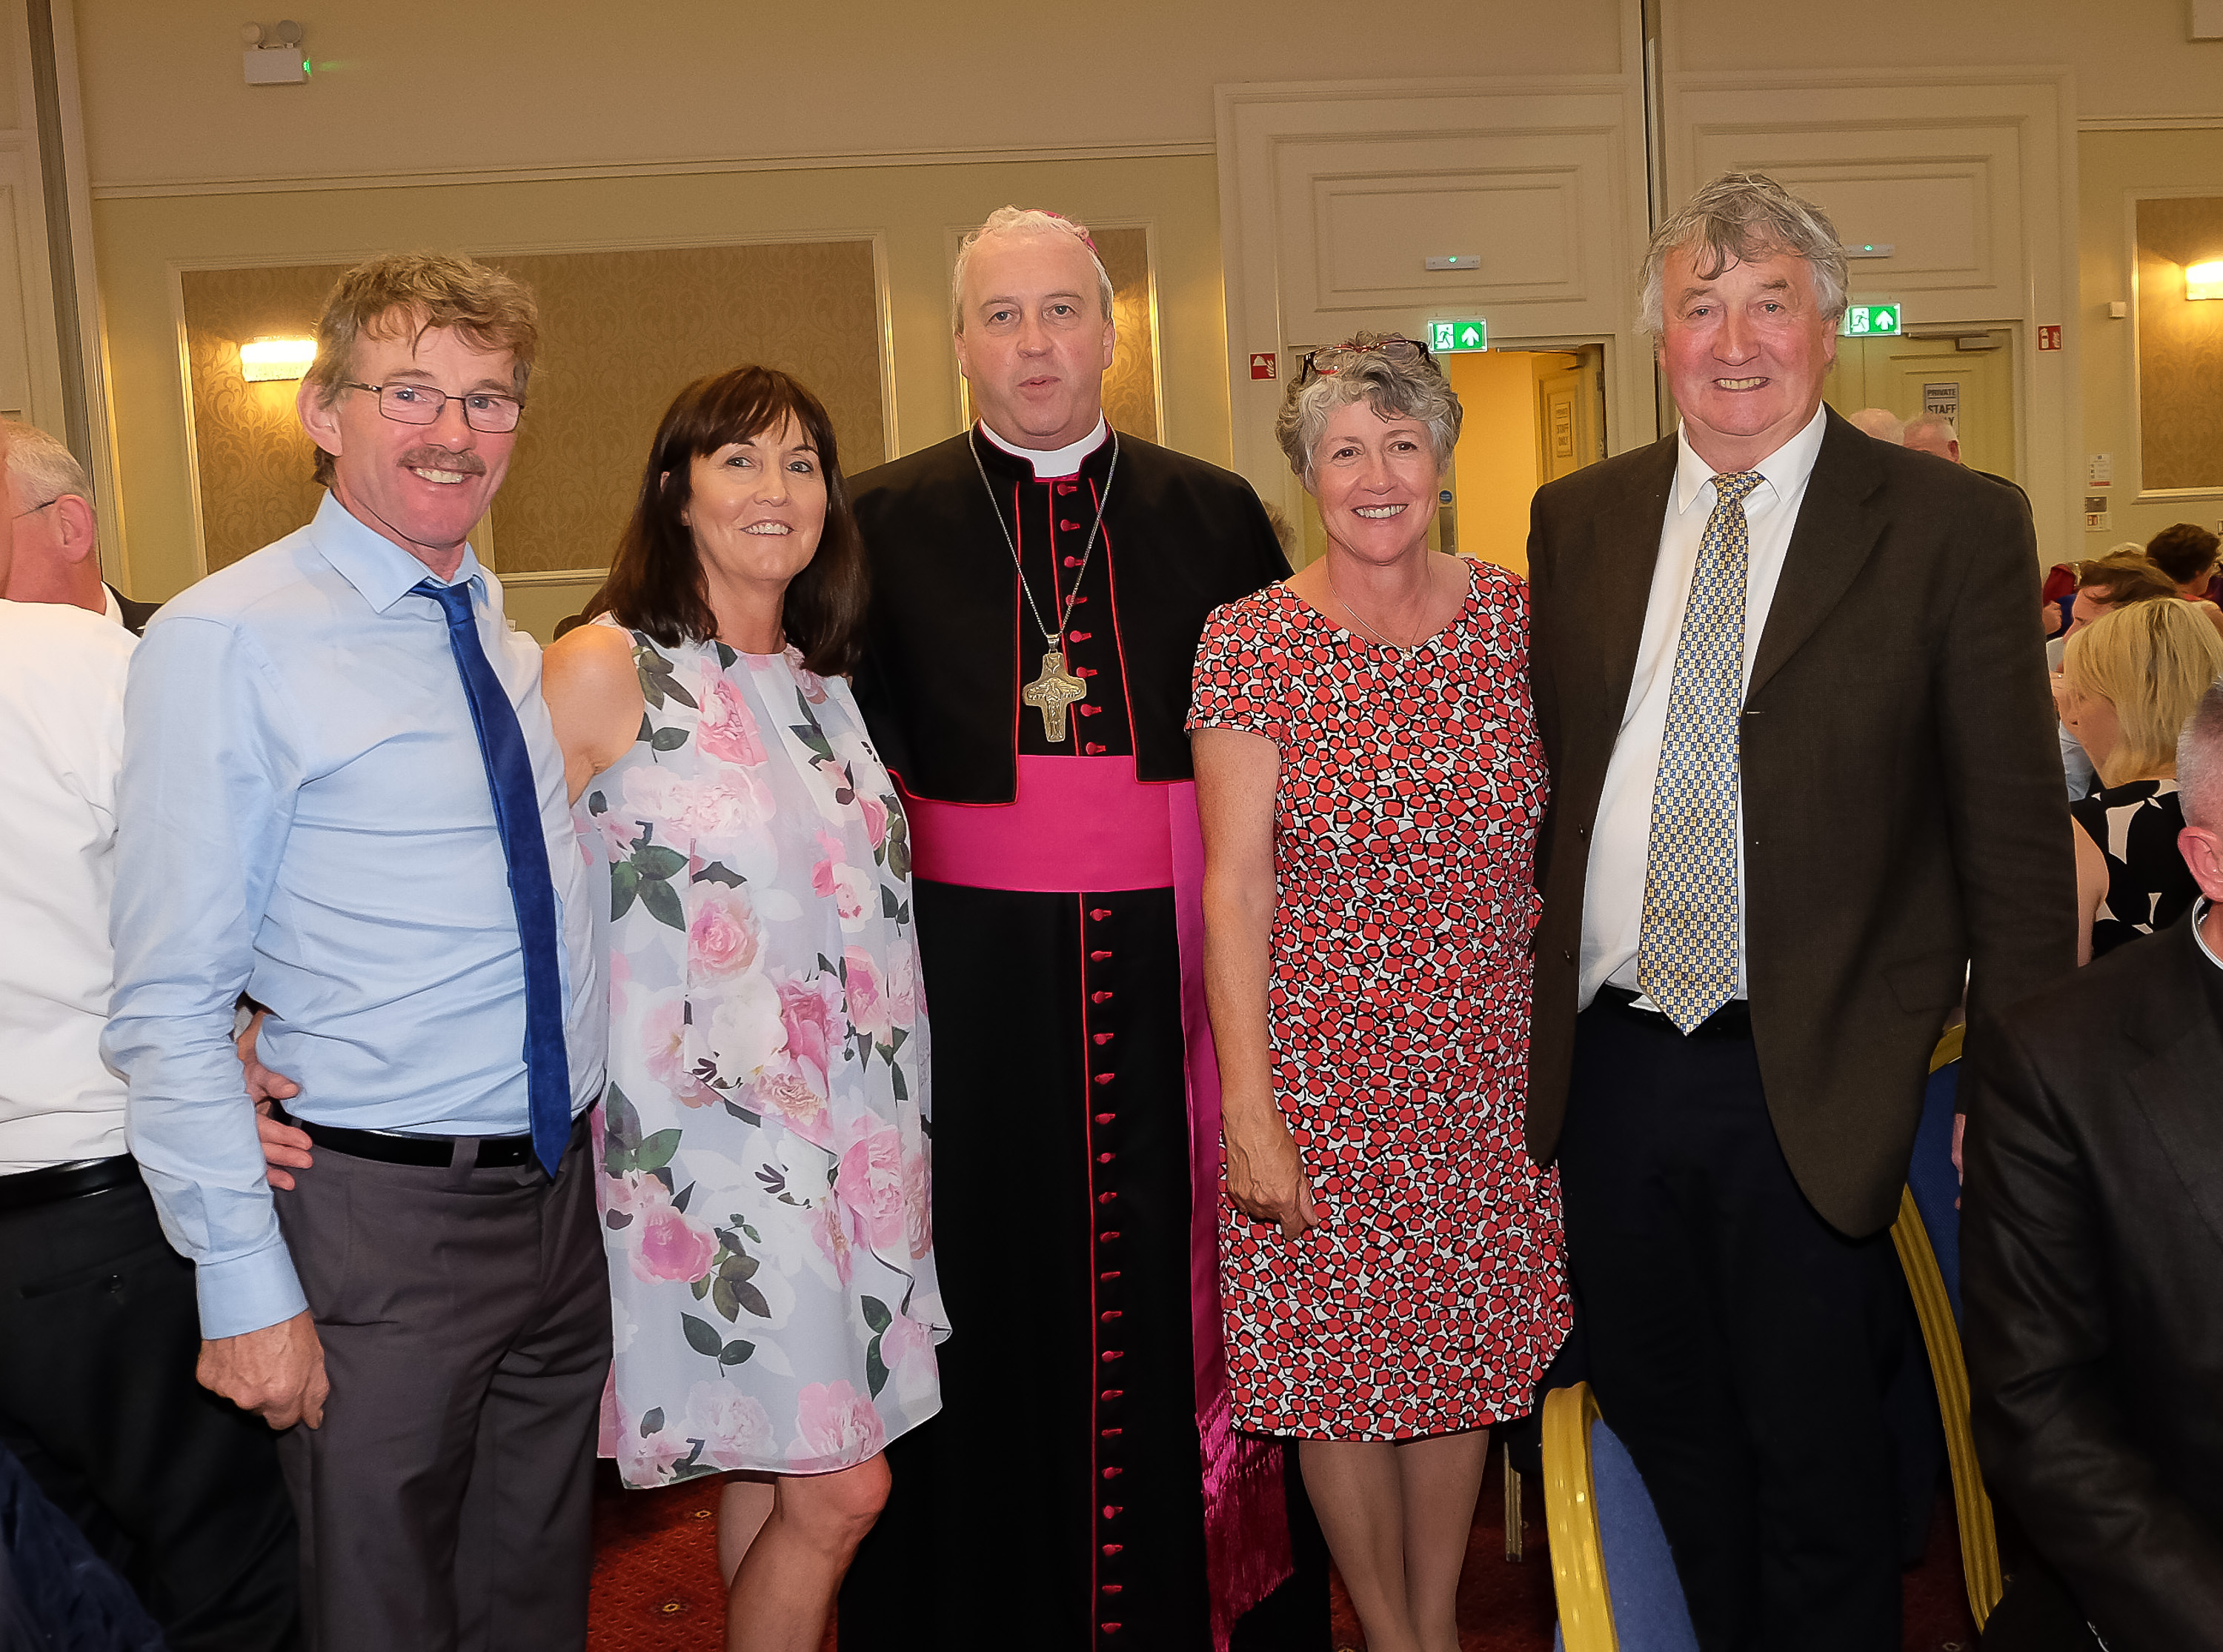 John Joe and Mary Hussey, left, and Bridie and Dermot Dolan with the new Bishop Michael Router at a celebration dinner following the Bishop's Ordination Armagh City Hotel, Armagh,  21 July 2019Credit: LiamMcArdle.com